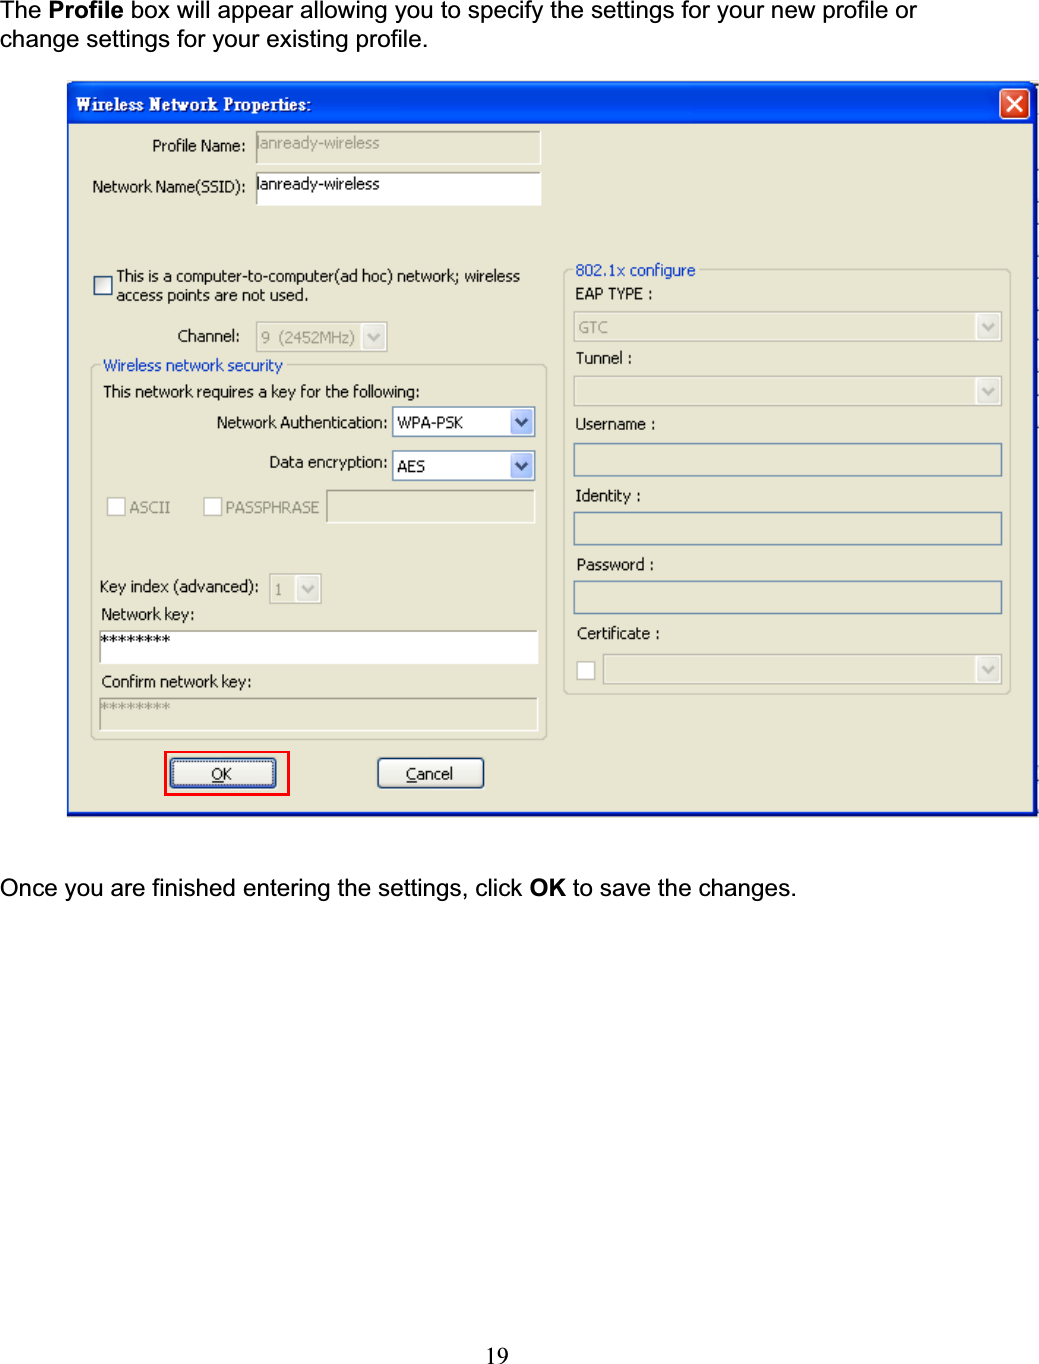 19The Profile box will appear allowing you to specify the settings for your new profile orchange settings for your existing profile.Once you are finished entering the settings, click OK to save the changes.